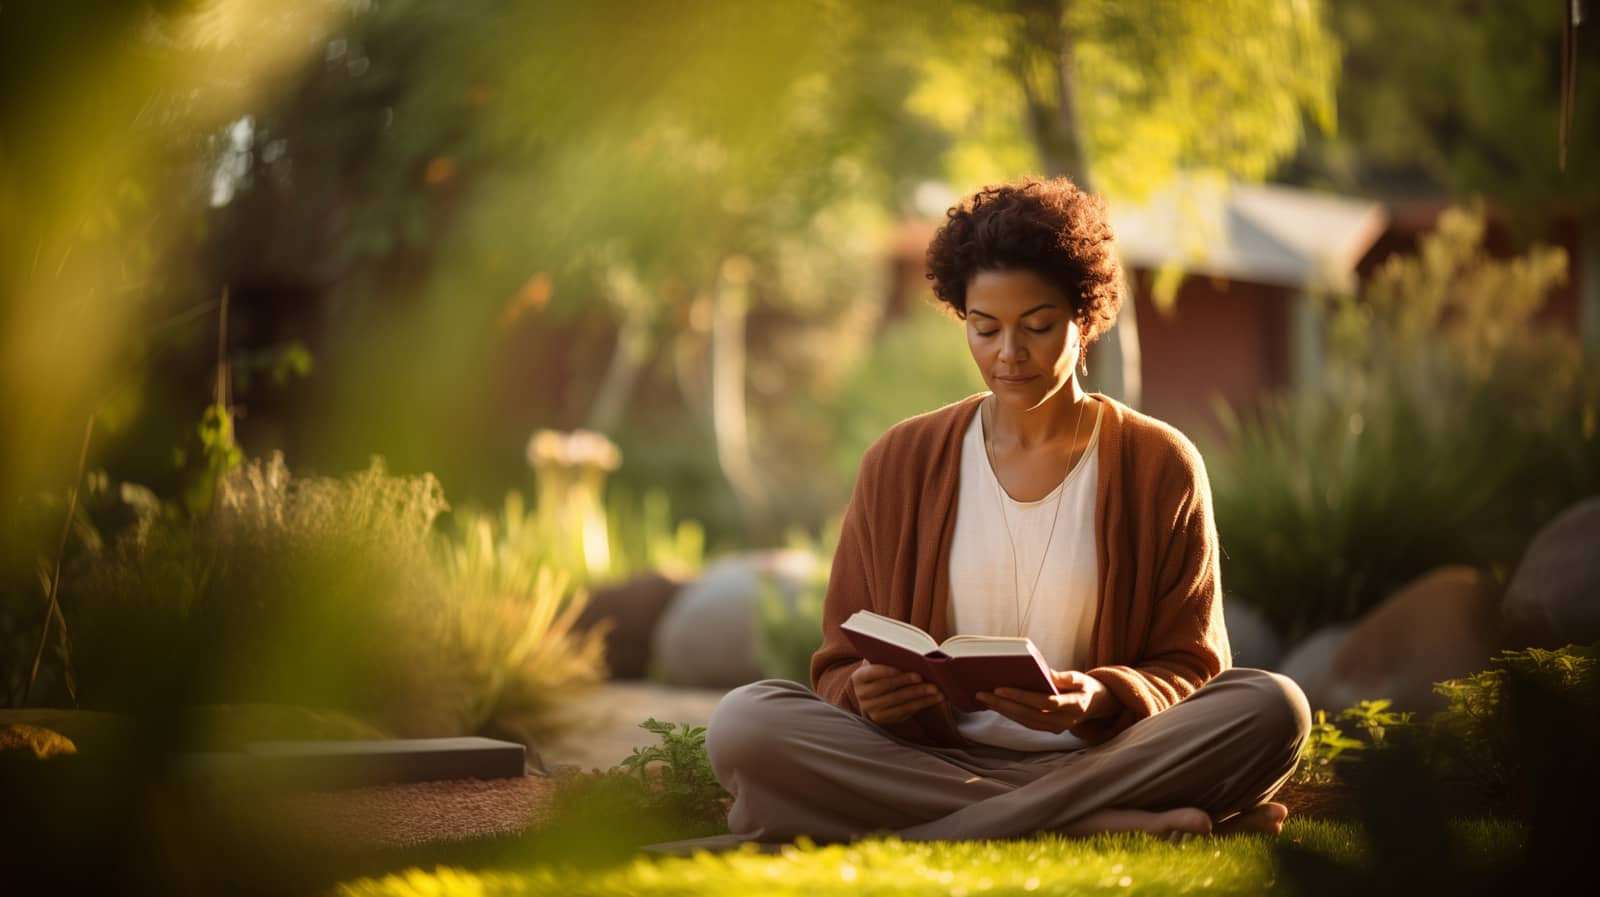 Woman in a 40s reading peacefully in the garden mind over matter building emotional strength